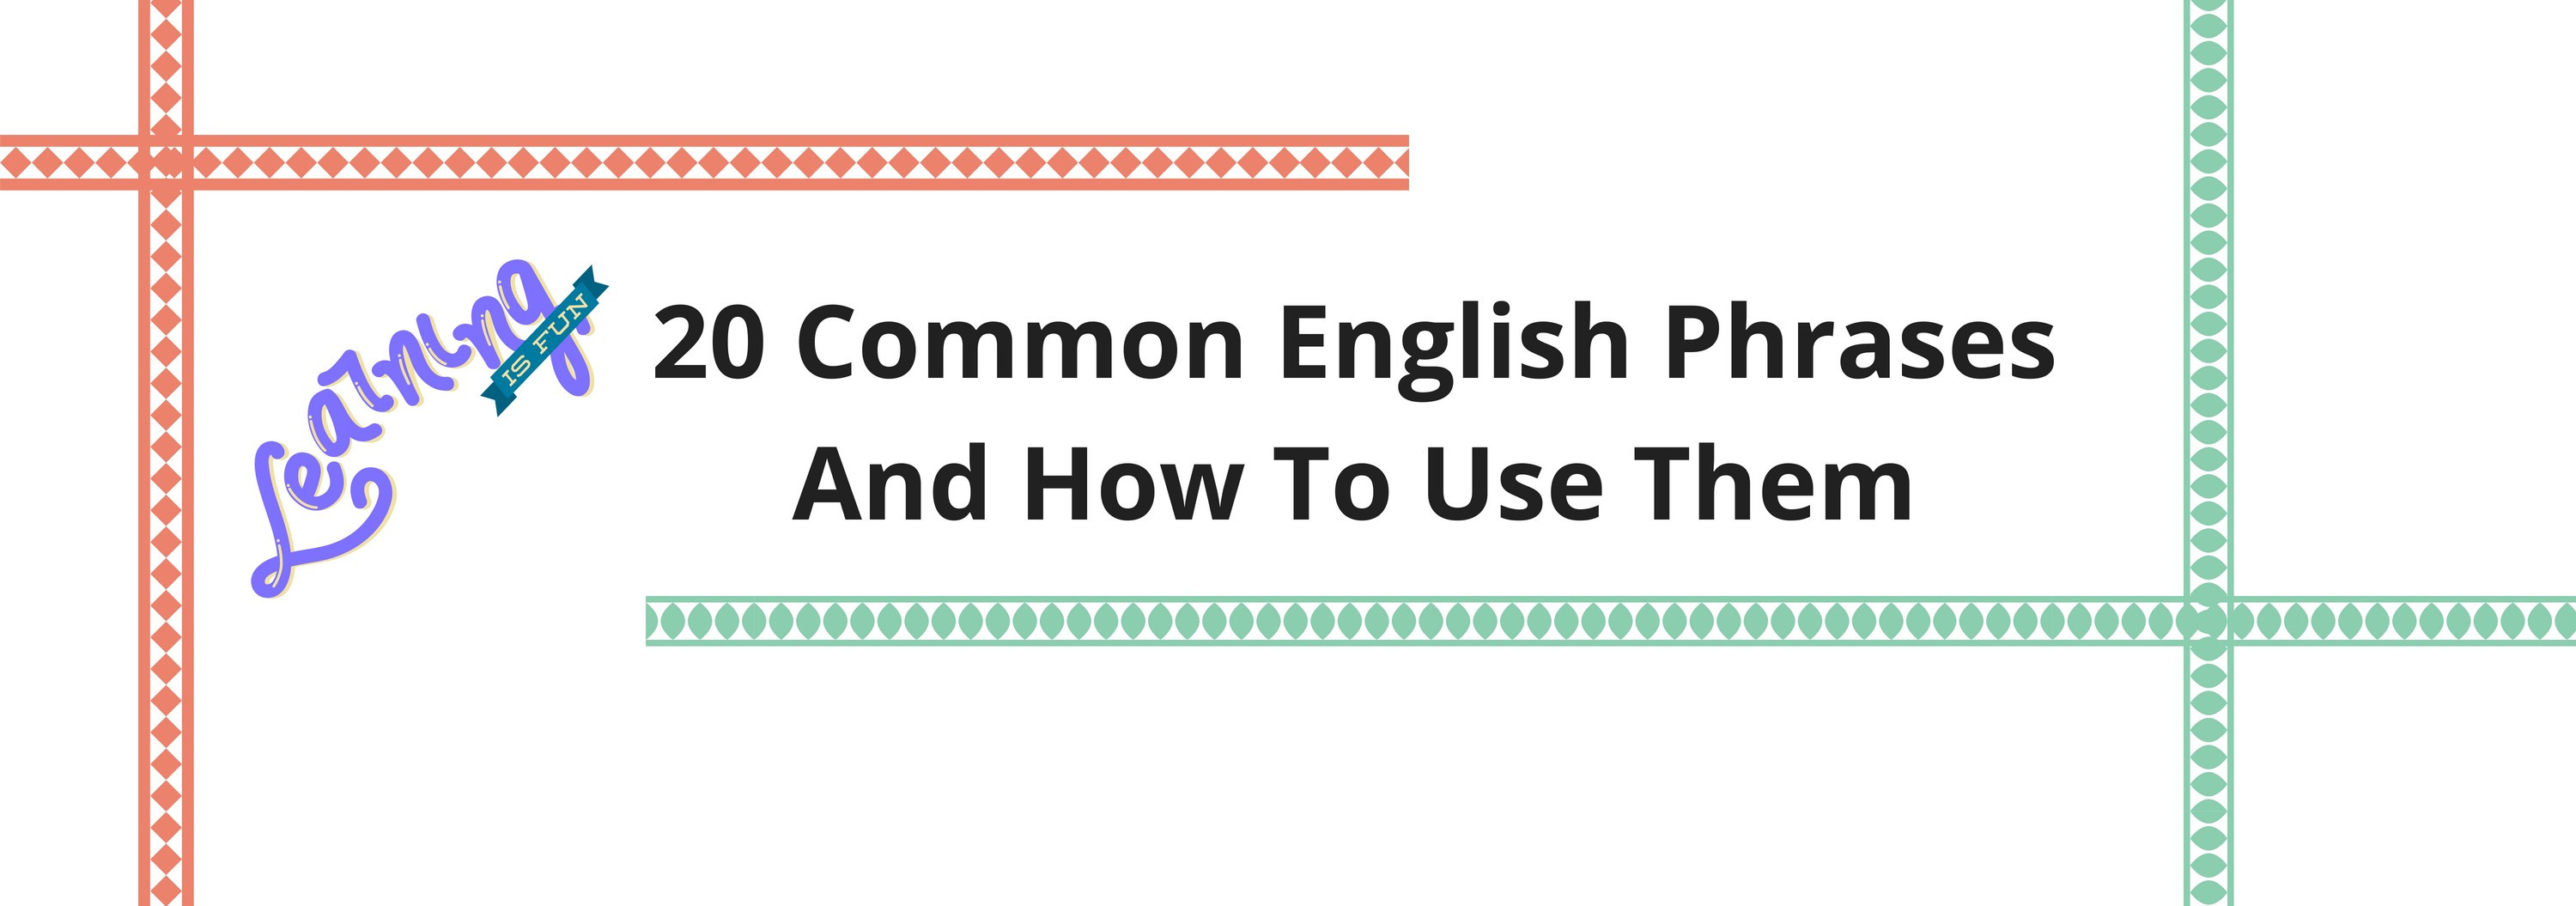 20 Common English Phrases And How To Use Them